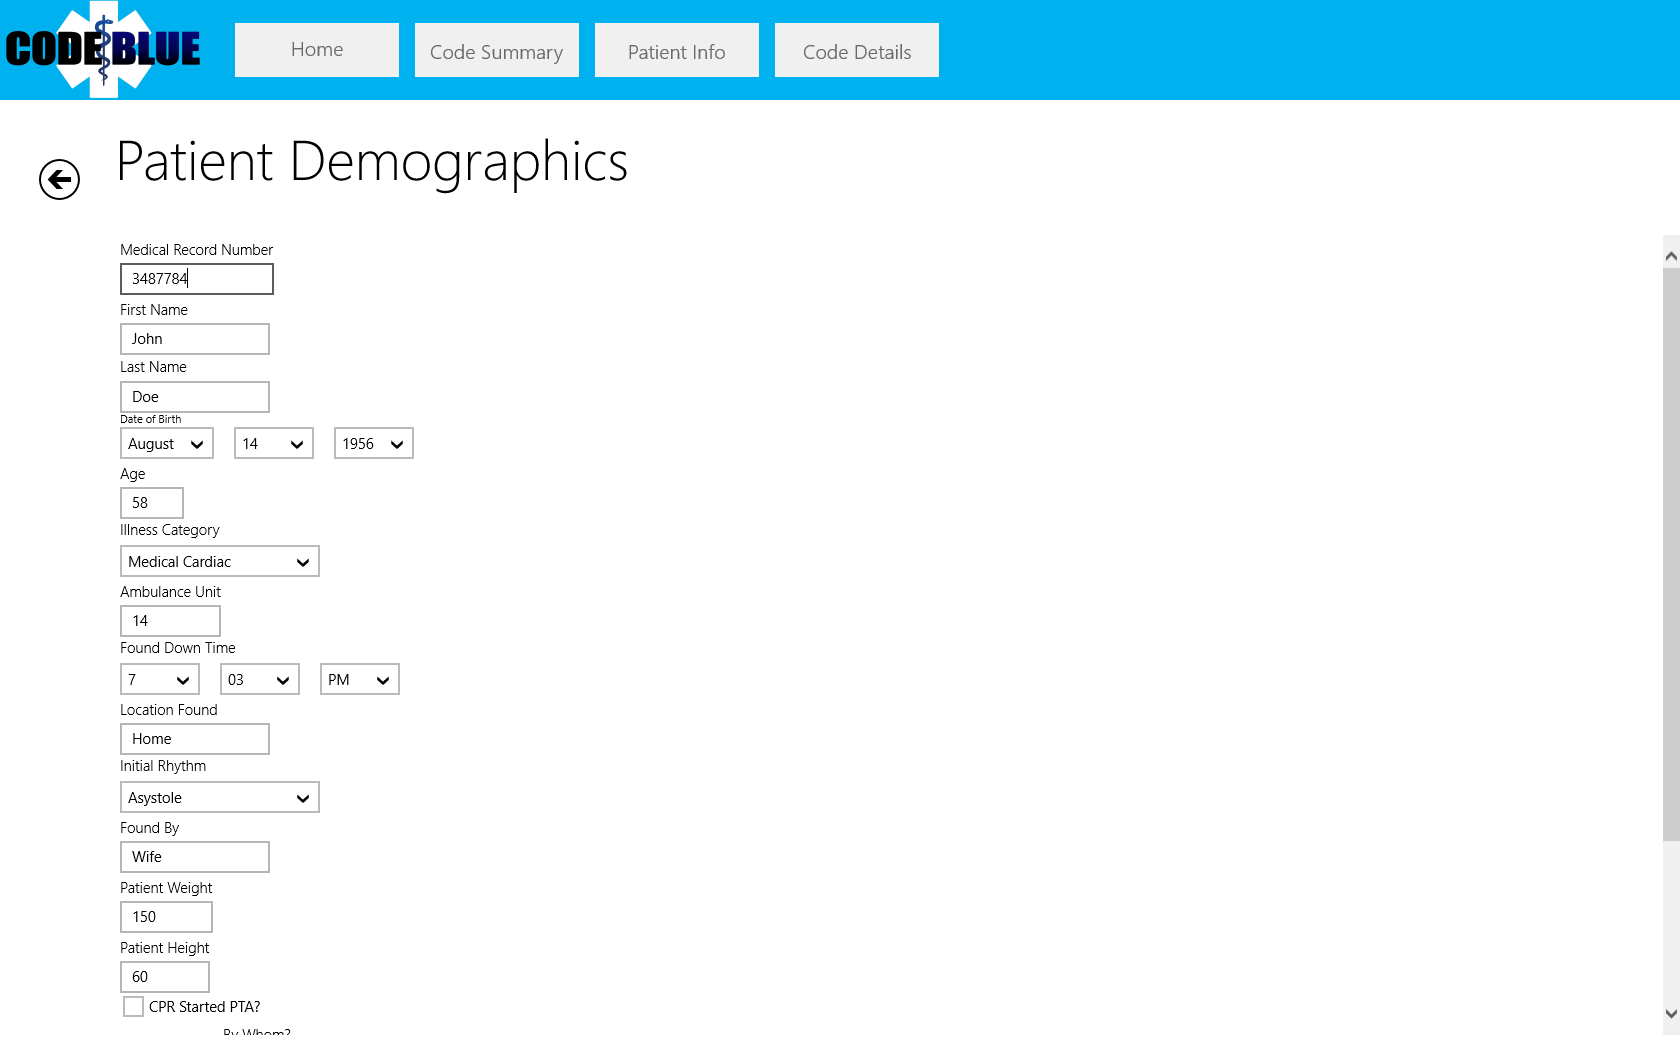 Complete demographic information can be captured.